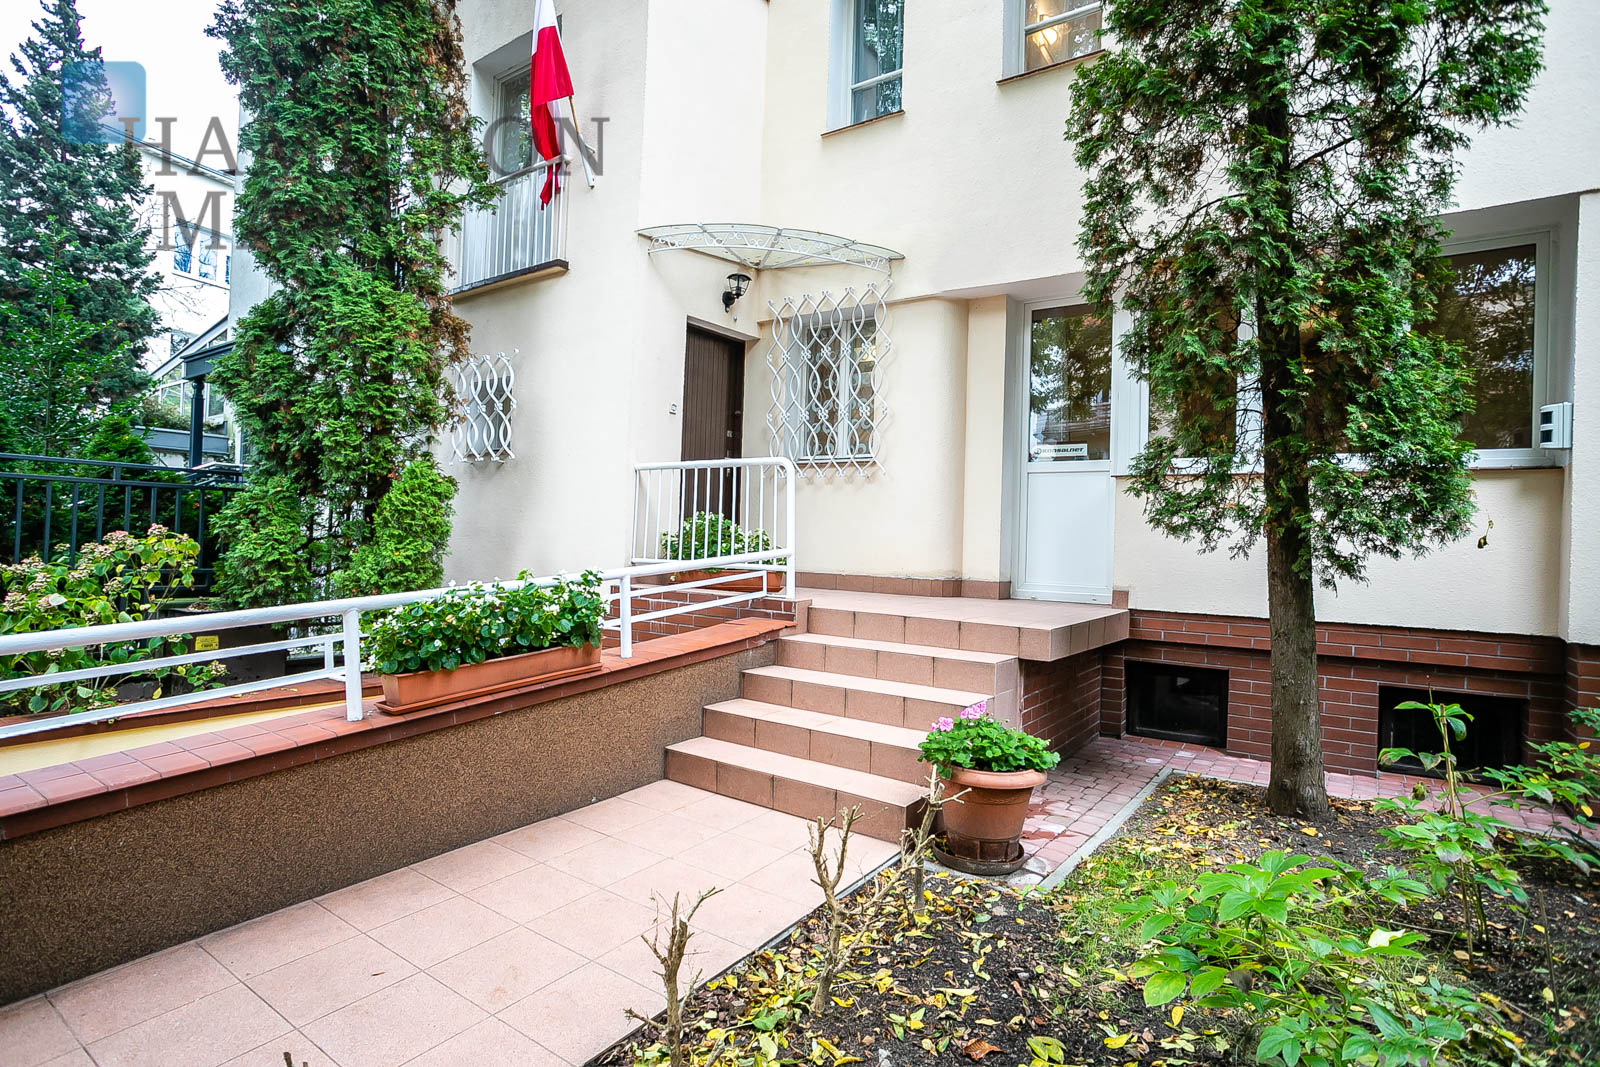 For rent a large house in the heart of Saska Kępa Warsaw for rent